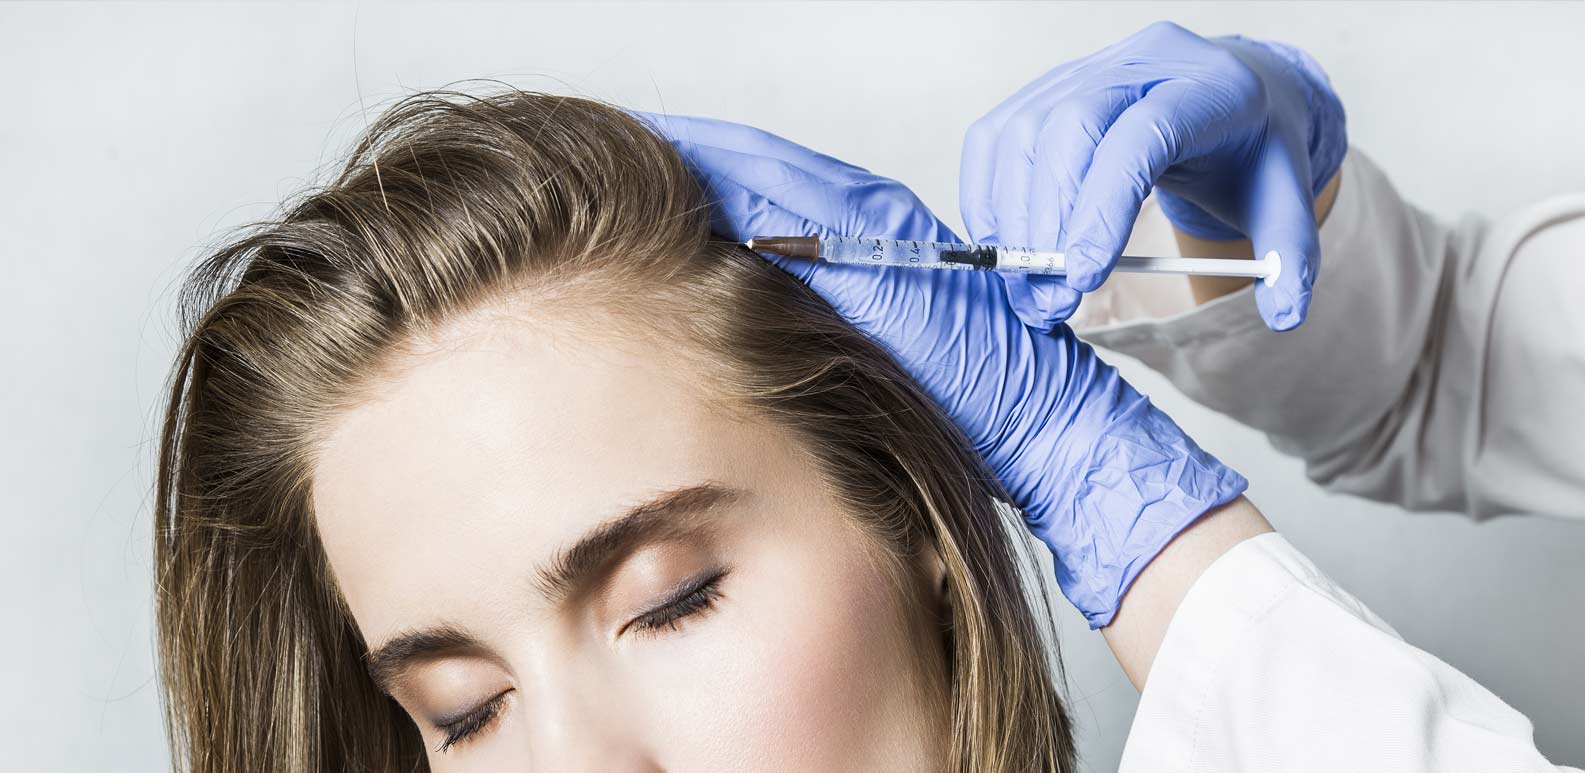 PRP Hair Loss Treatment: Why Isn't It Available in Singapore?